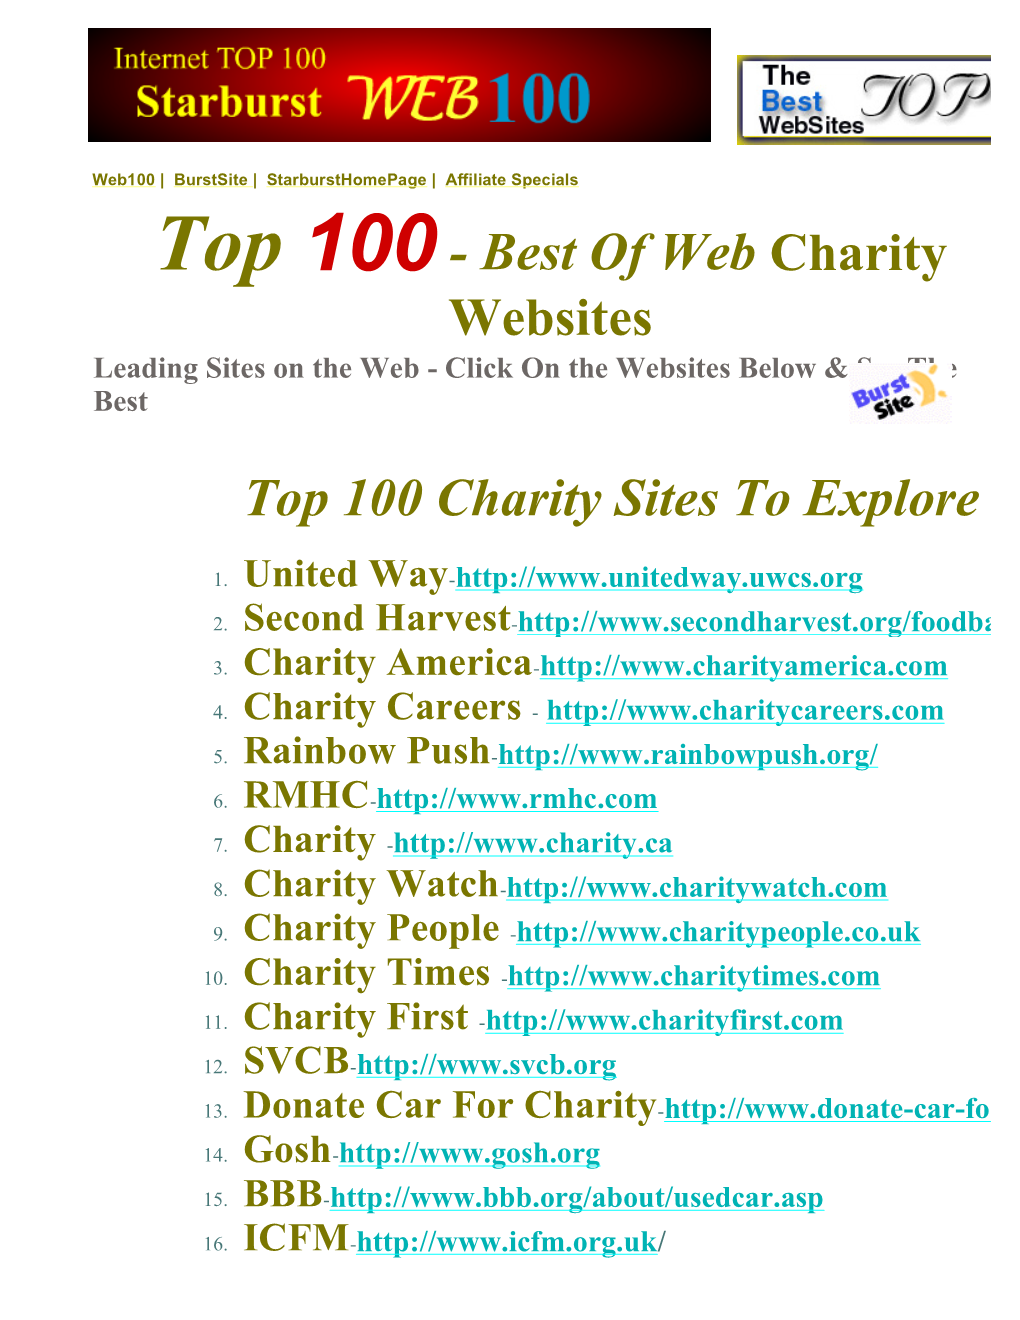 Top 100 - Best of Web Charity Websites Leading Sites on the Web - Click on the Websites Below & See The